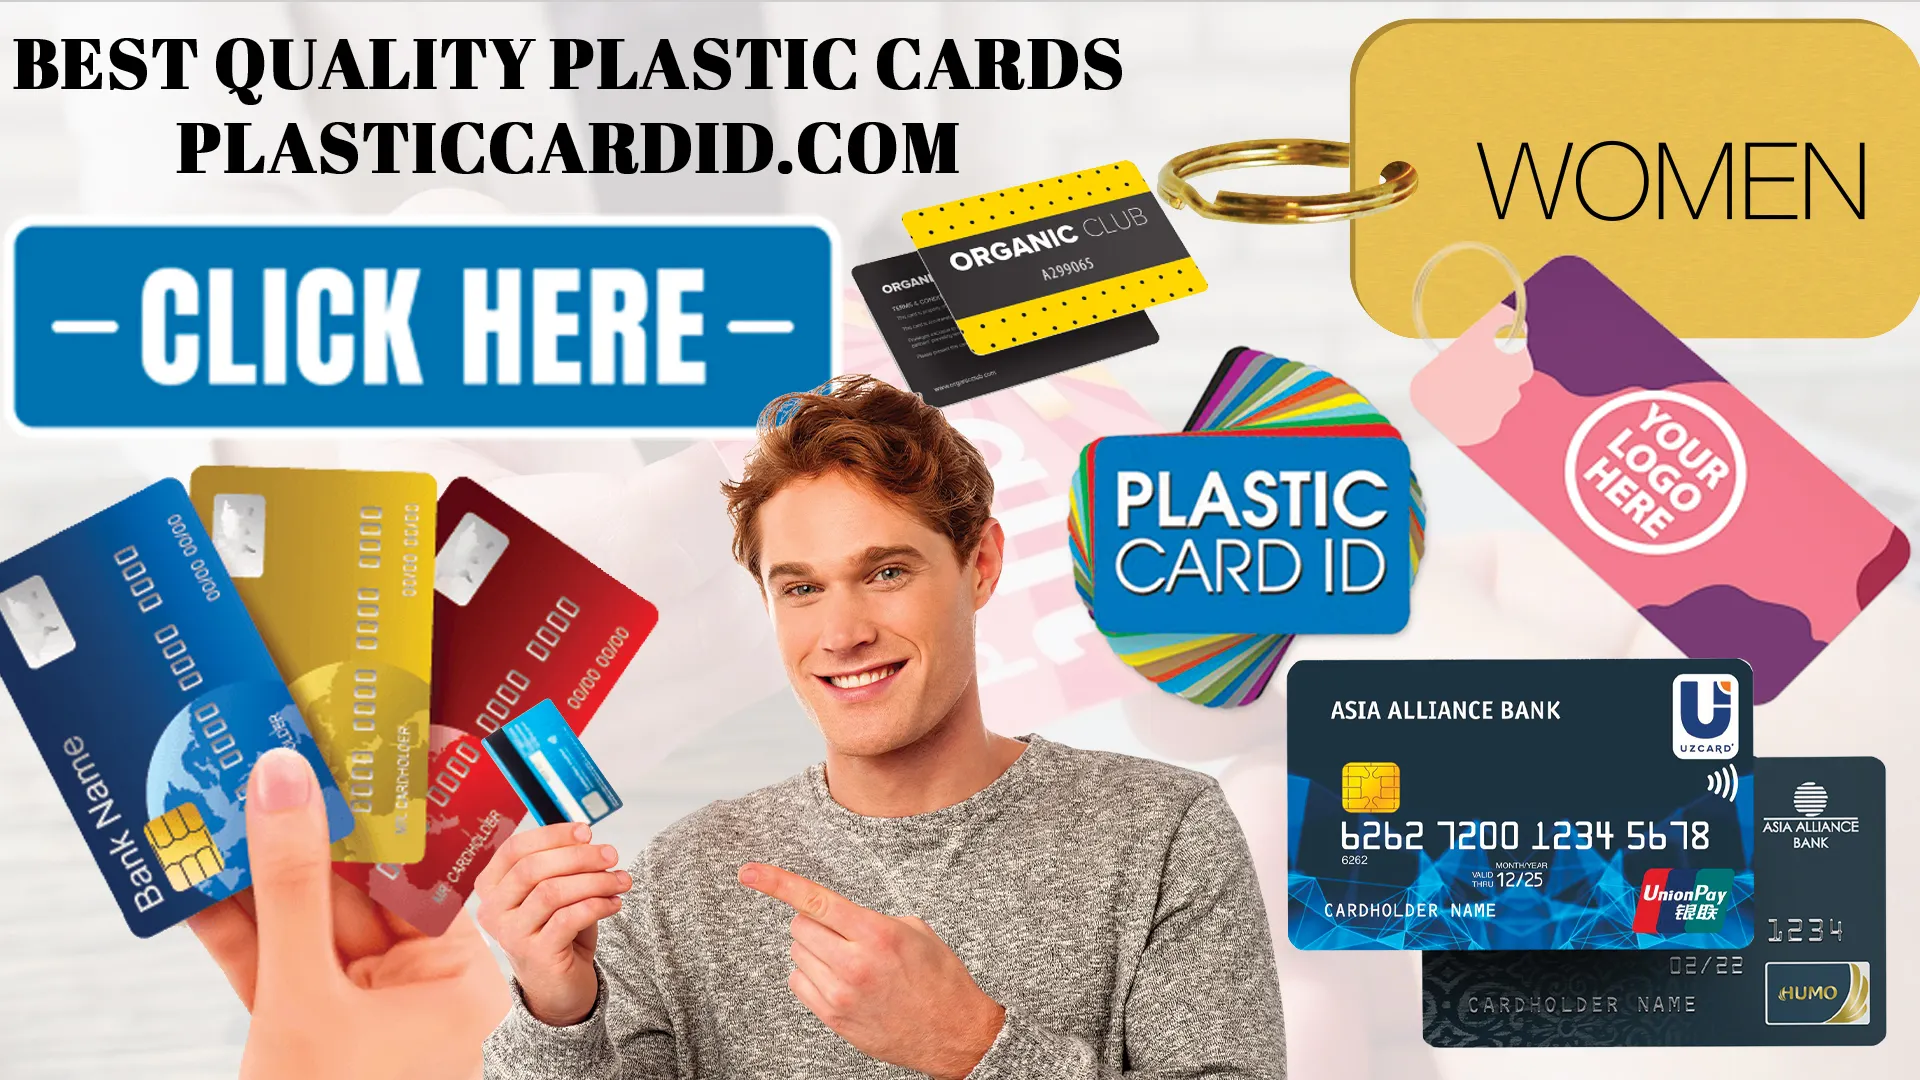 Making the Most of Your Plastic Cards